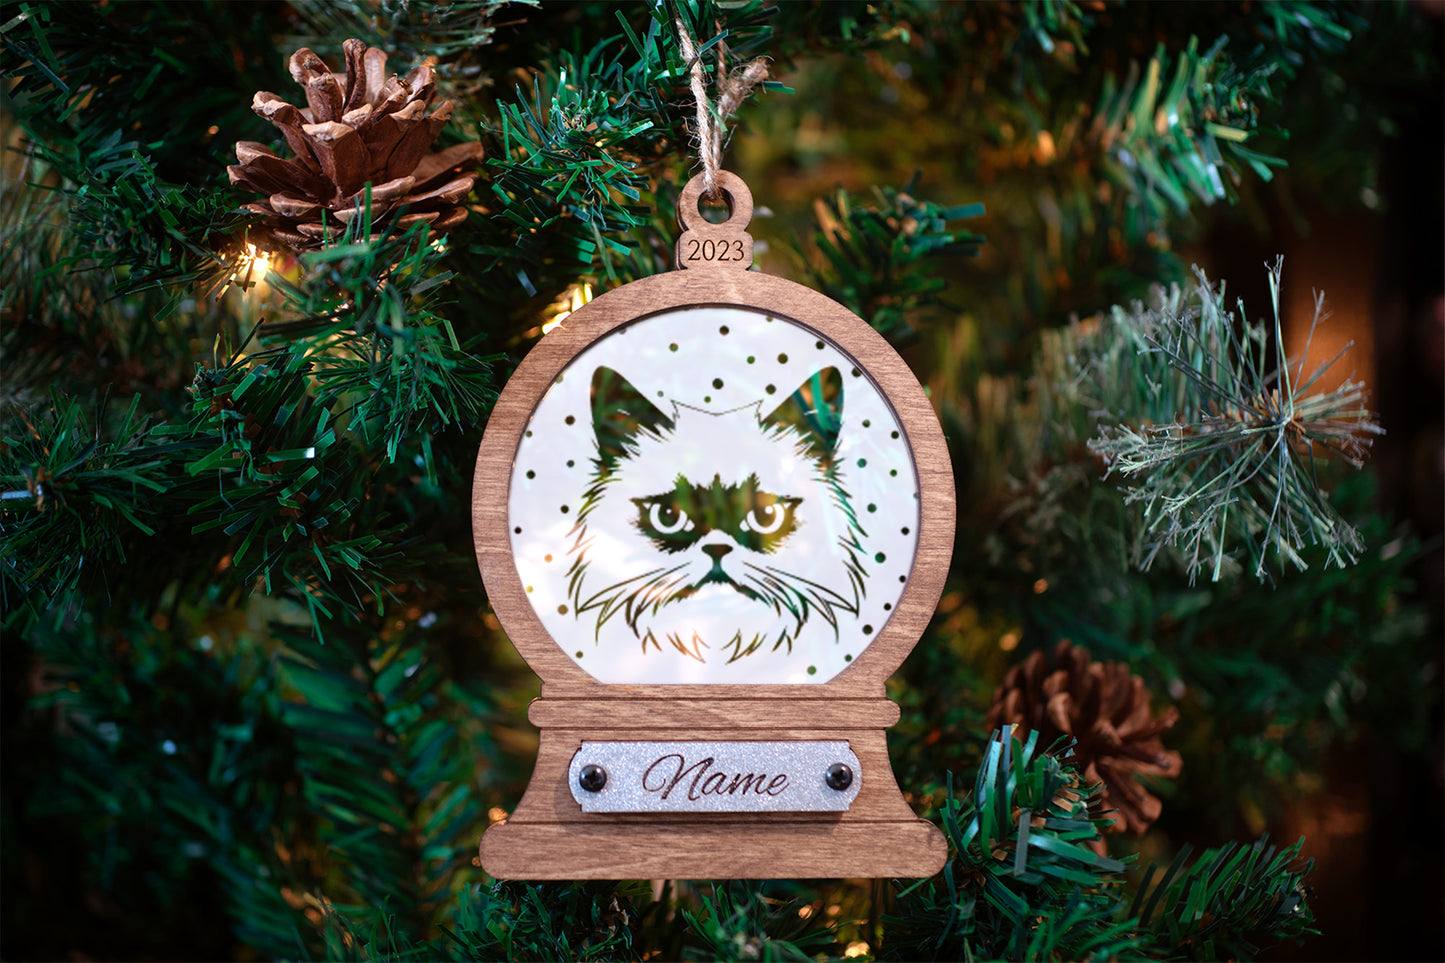 Personalized Acrylic and Wood Cat Snowglobe Ornaments